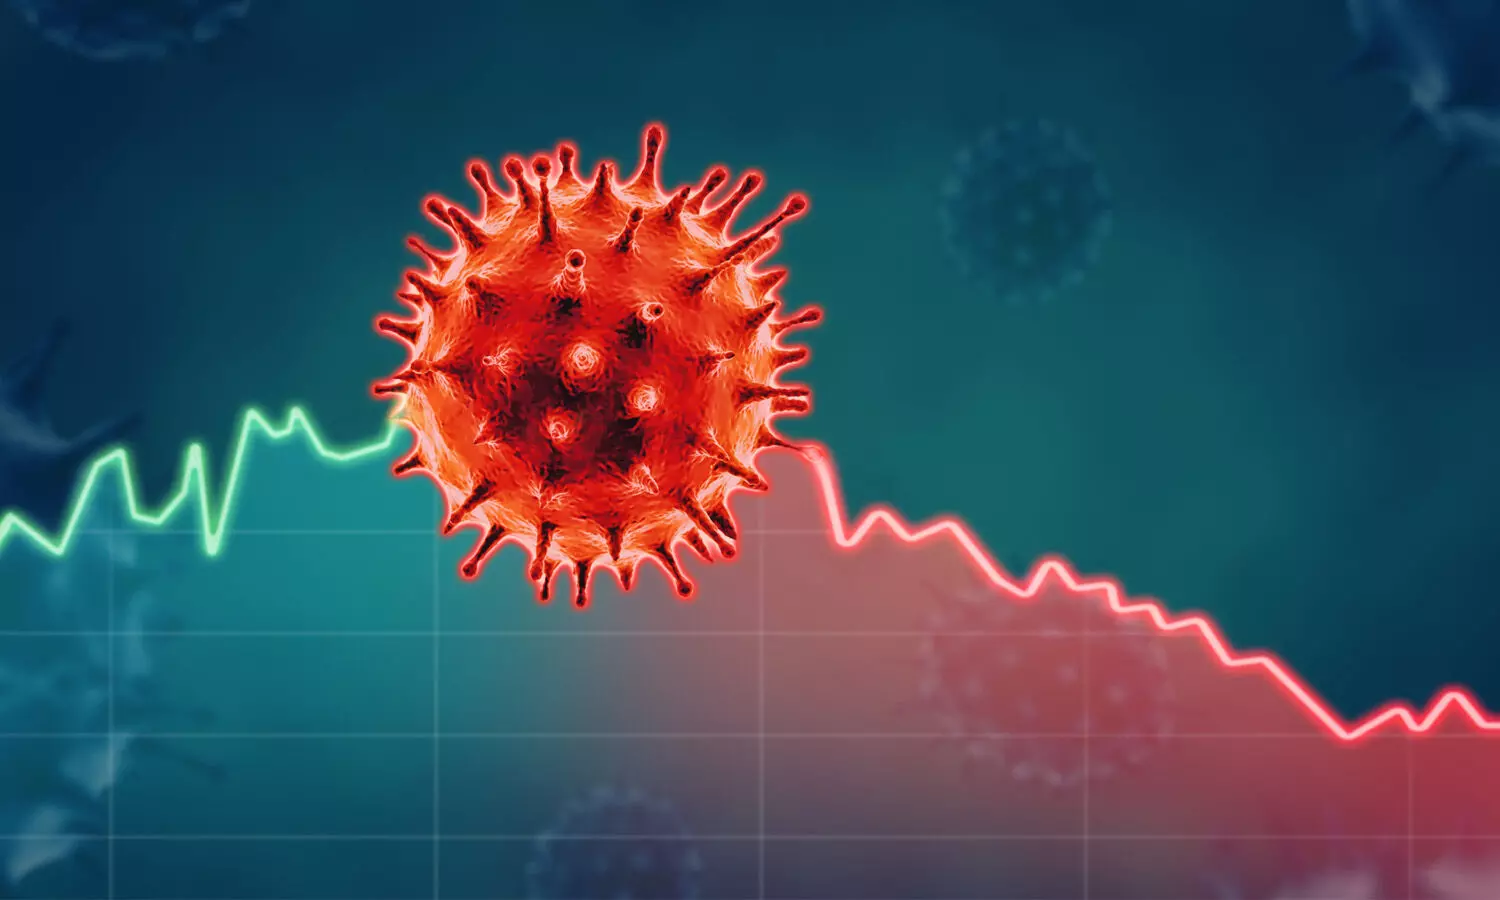 Sudden spike of coronavirus: 910 deaths in Brazil due to COVID-19